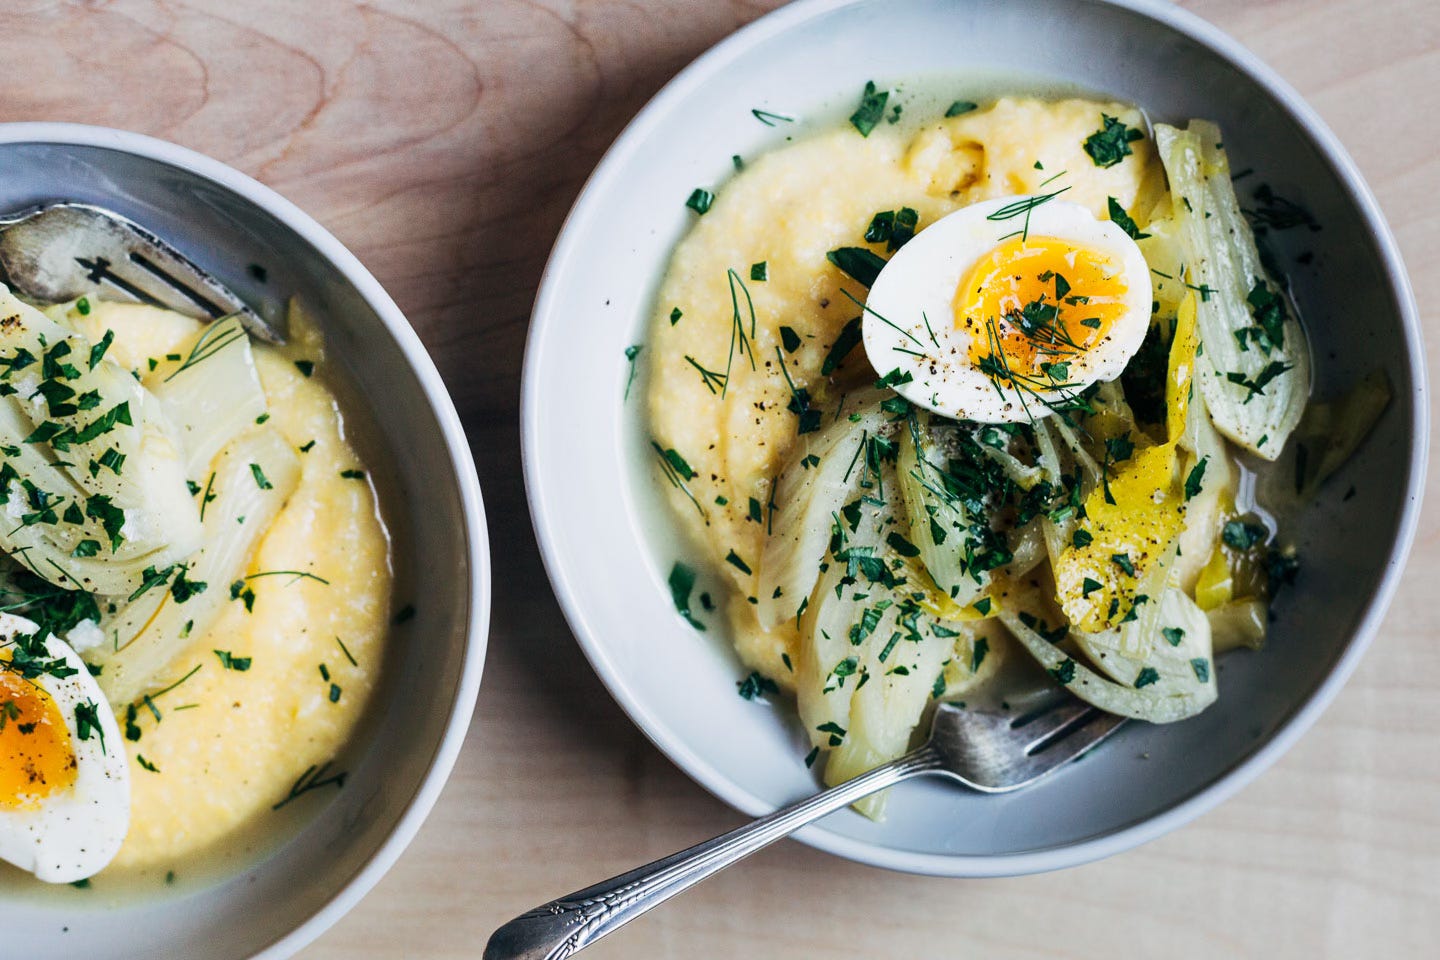 Bowls of polenta with braised fennel and leeks, a jammy egg, and herbs. 